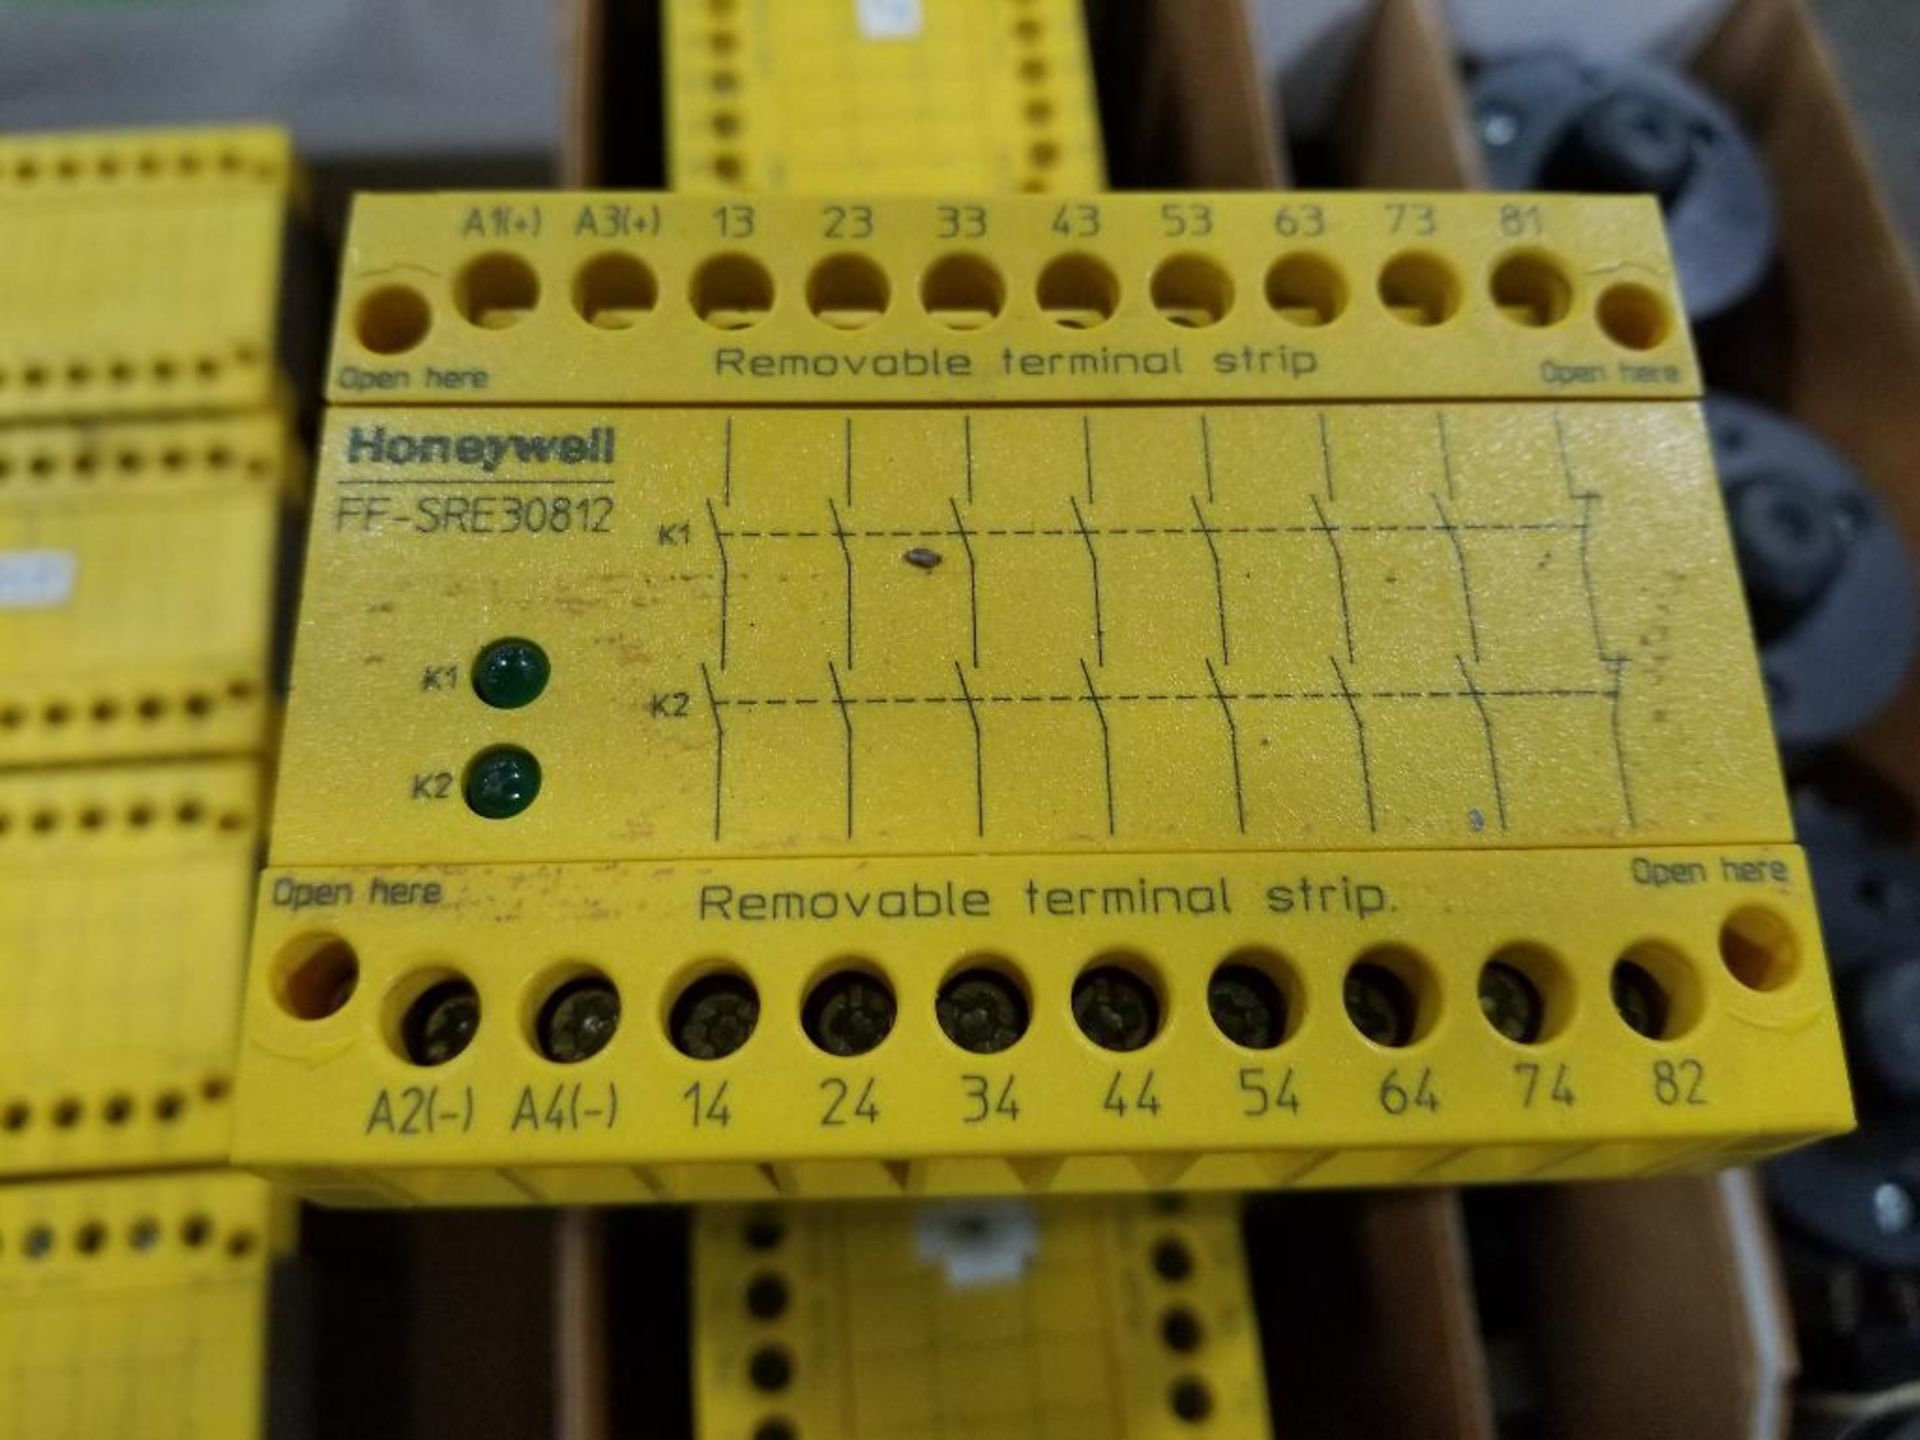 Qty 4 - Honeywell safety module. Part number FF-SRE30812. - Image 3 of 4